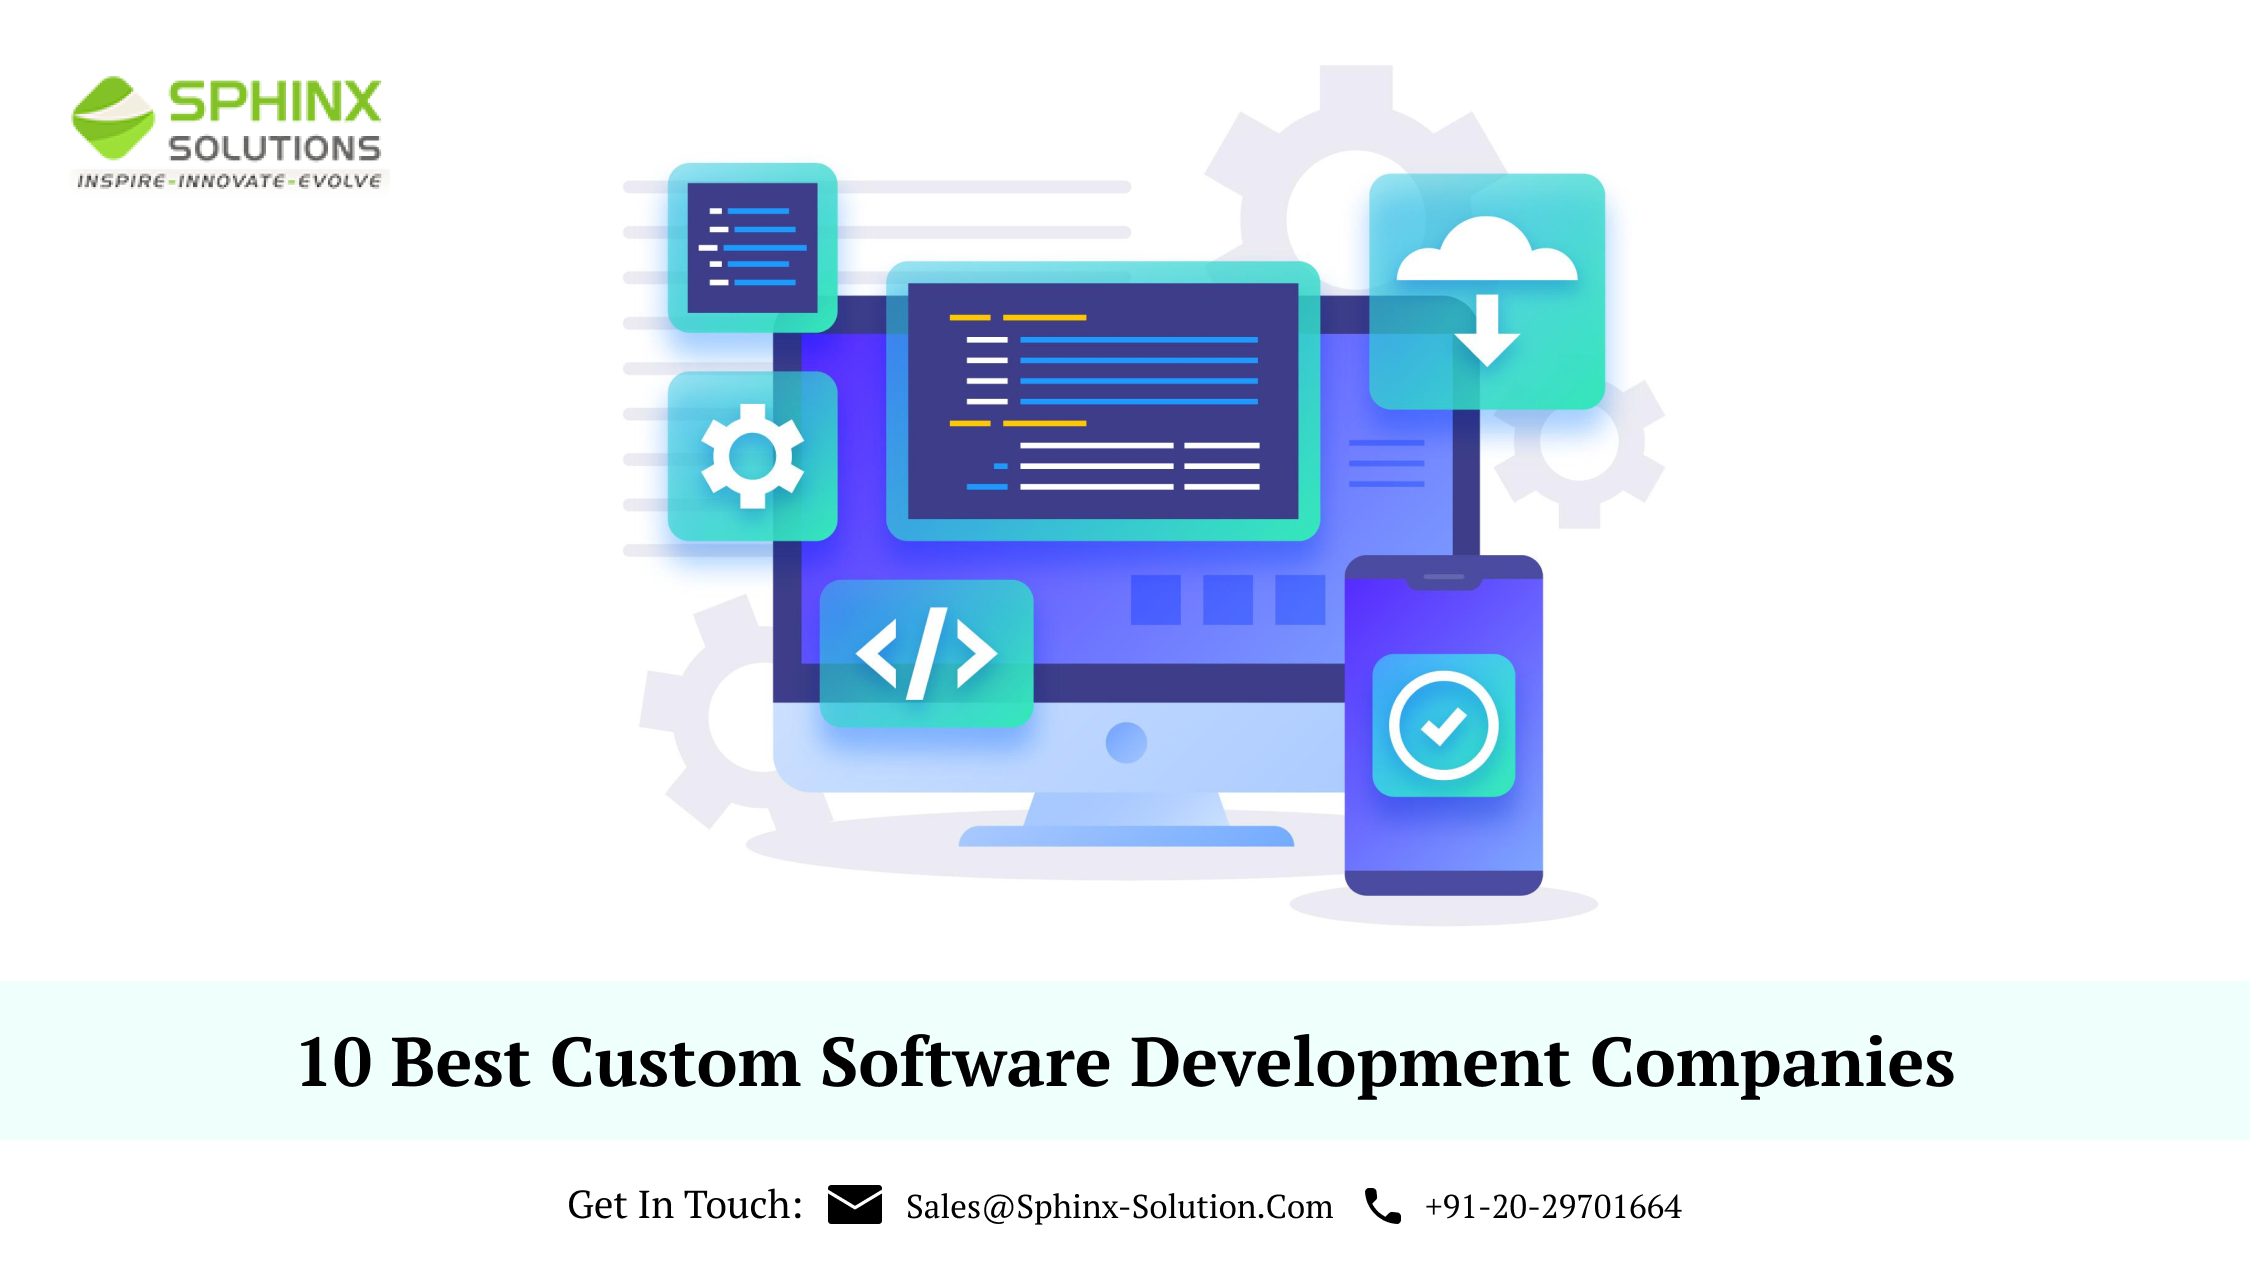 &amp;, SPHINX

SOLUTIONS

INSPIRE - INNOVATE -EVOLVE

 

10 Best Custom Software Development Companies

Get In Touch: DM Sales@Sphinx-Solution.Com R¥ +91-20-29701664